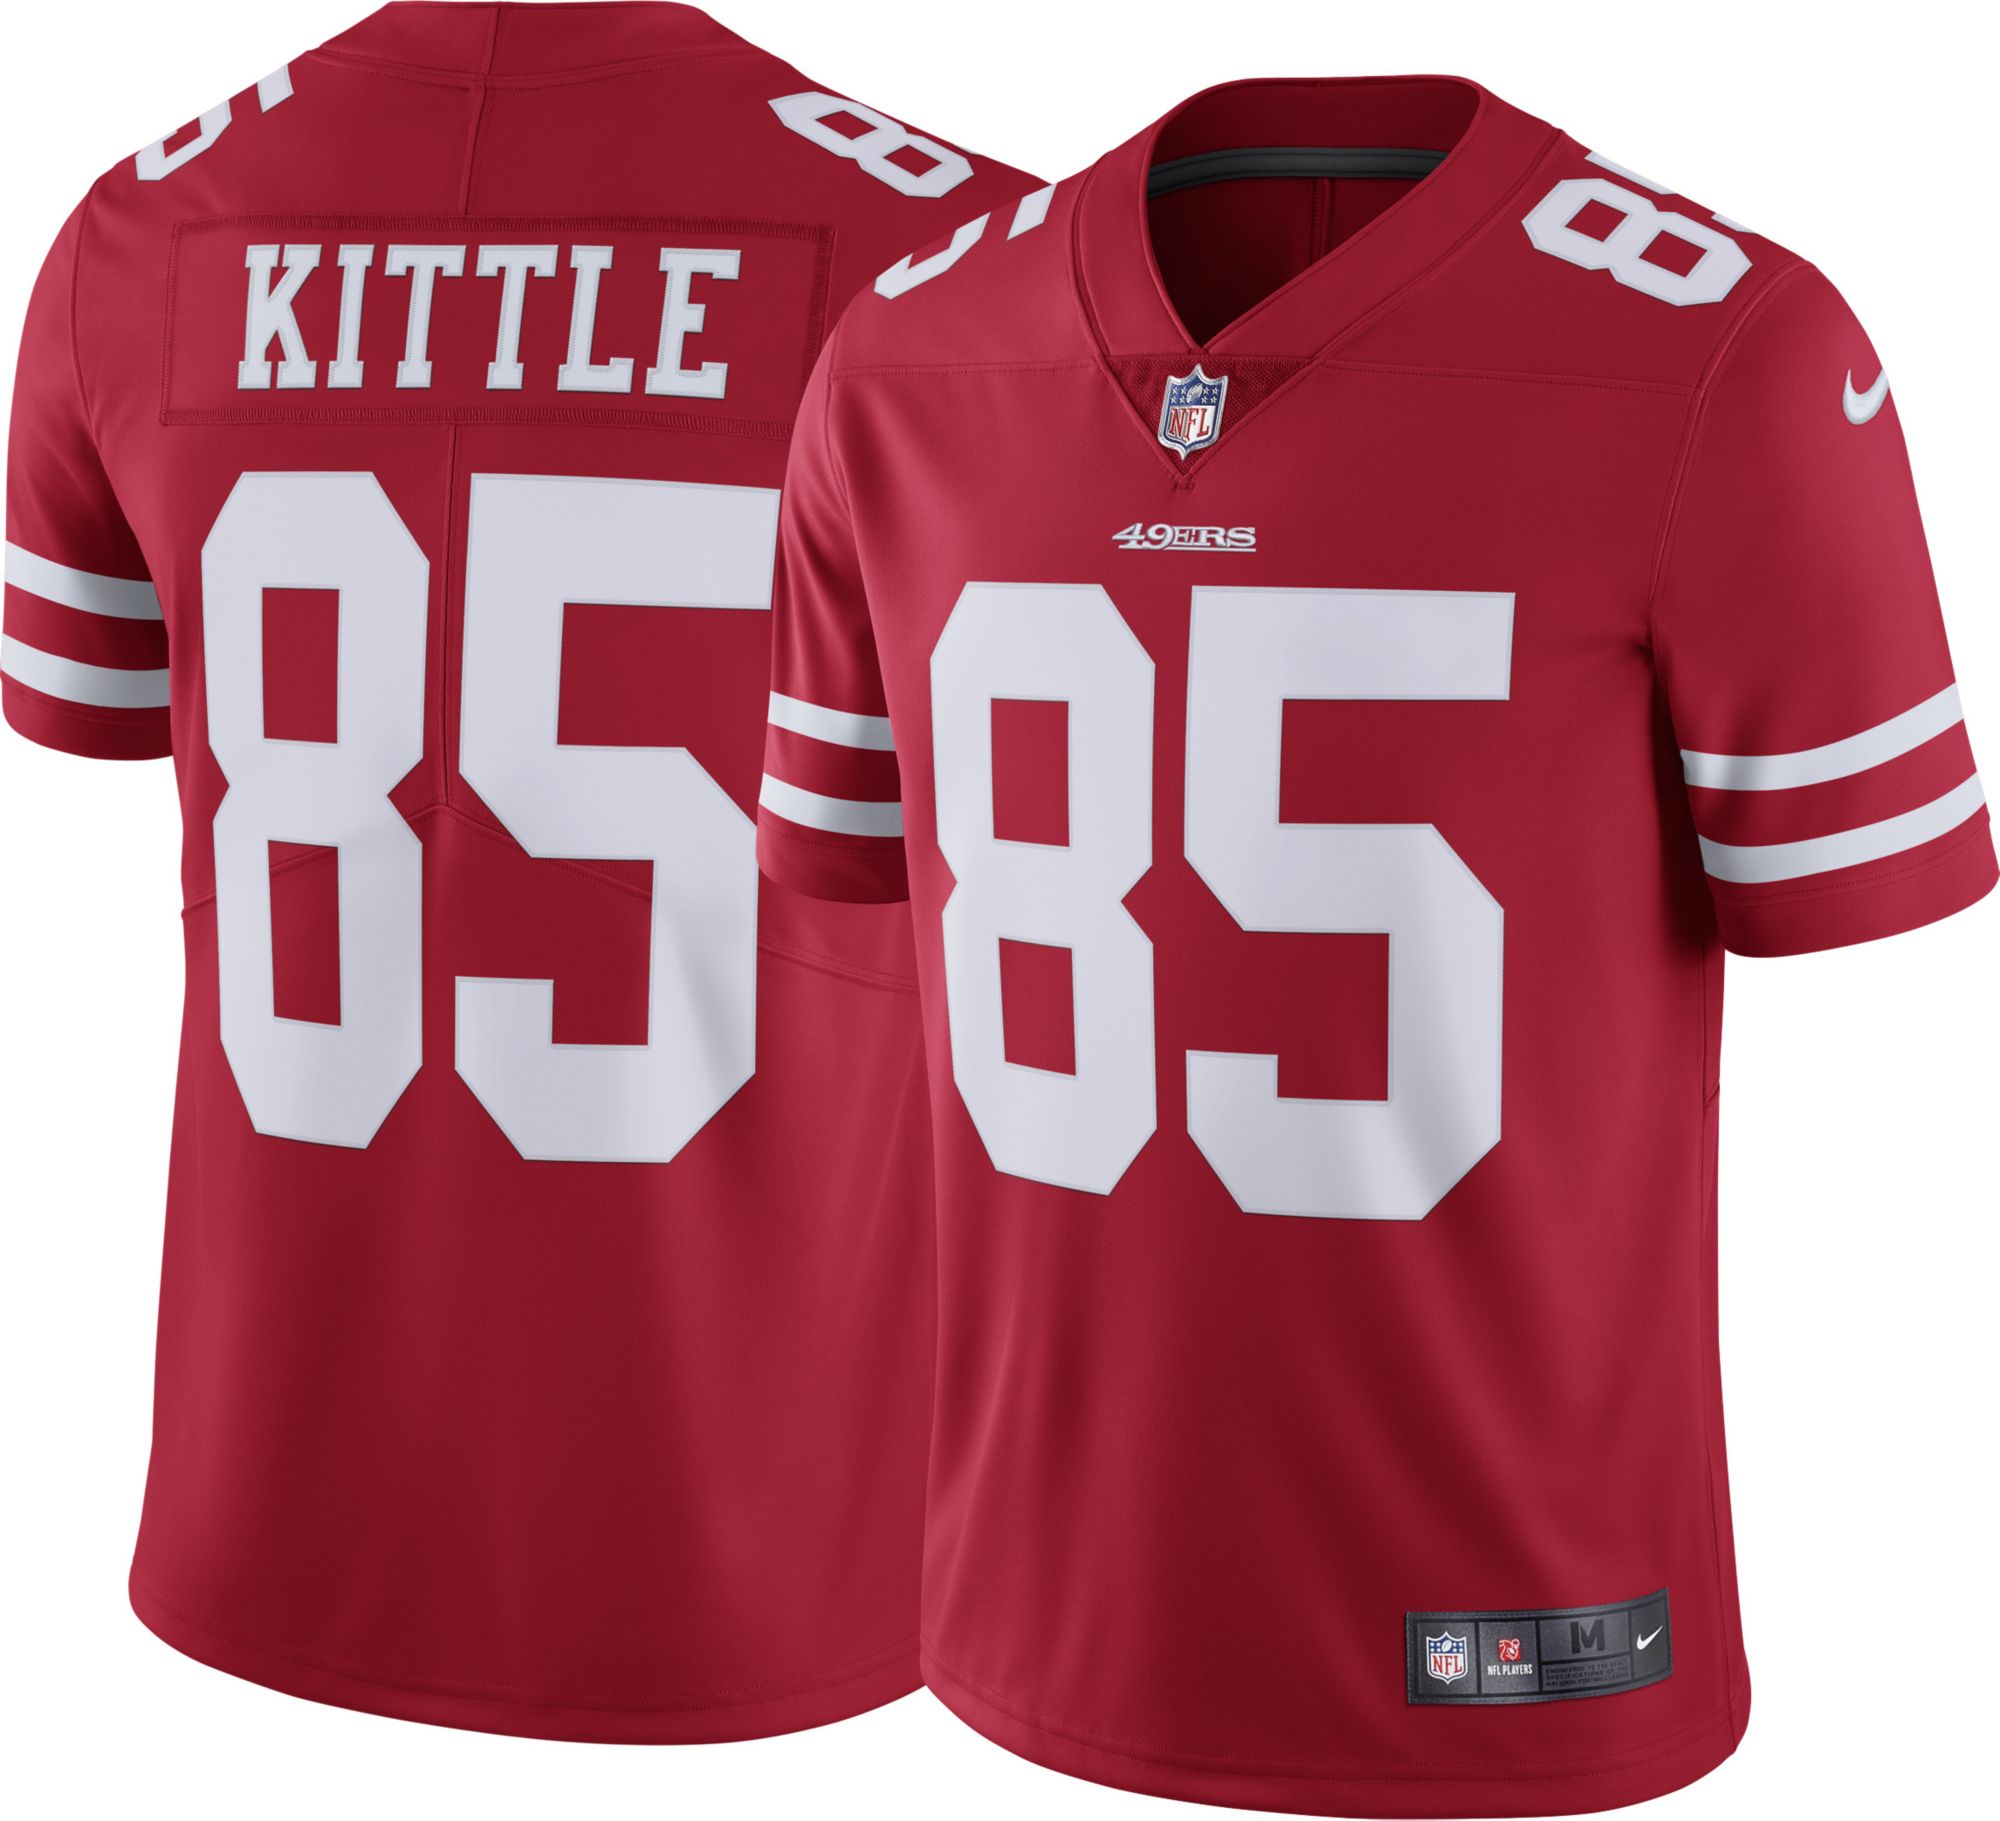 black and red kittle jersey